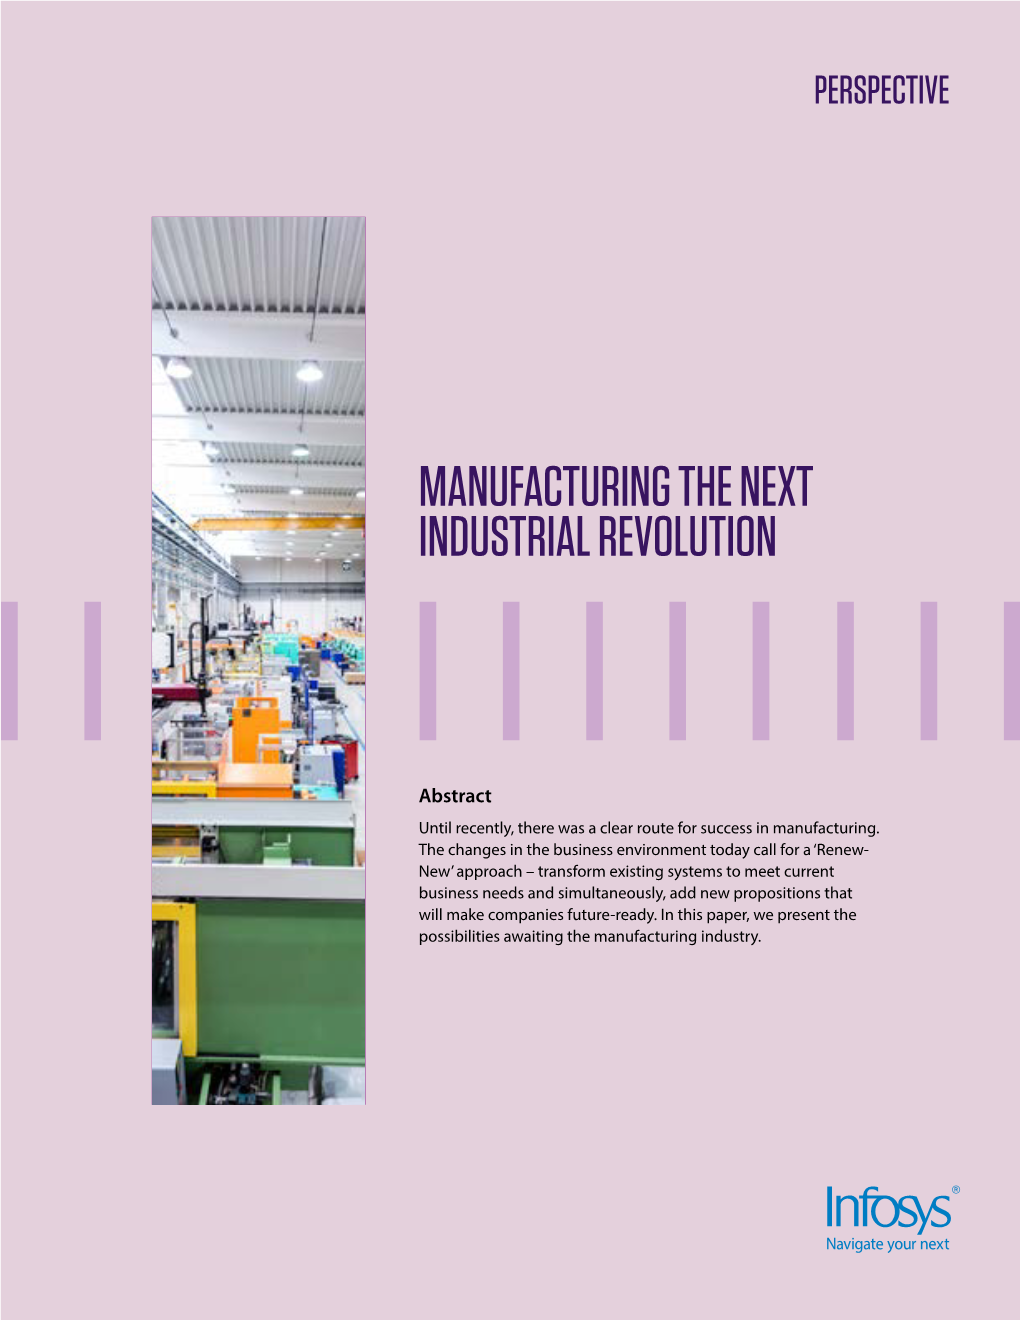 Manufacturing the Next Industrial Revolution